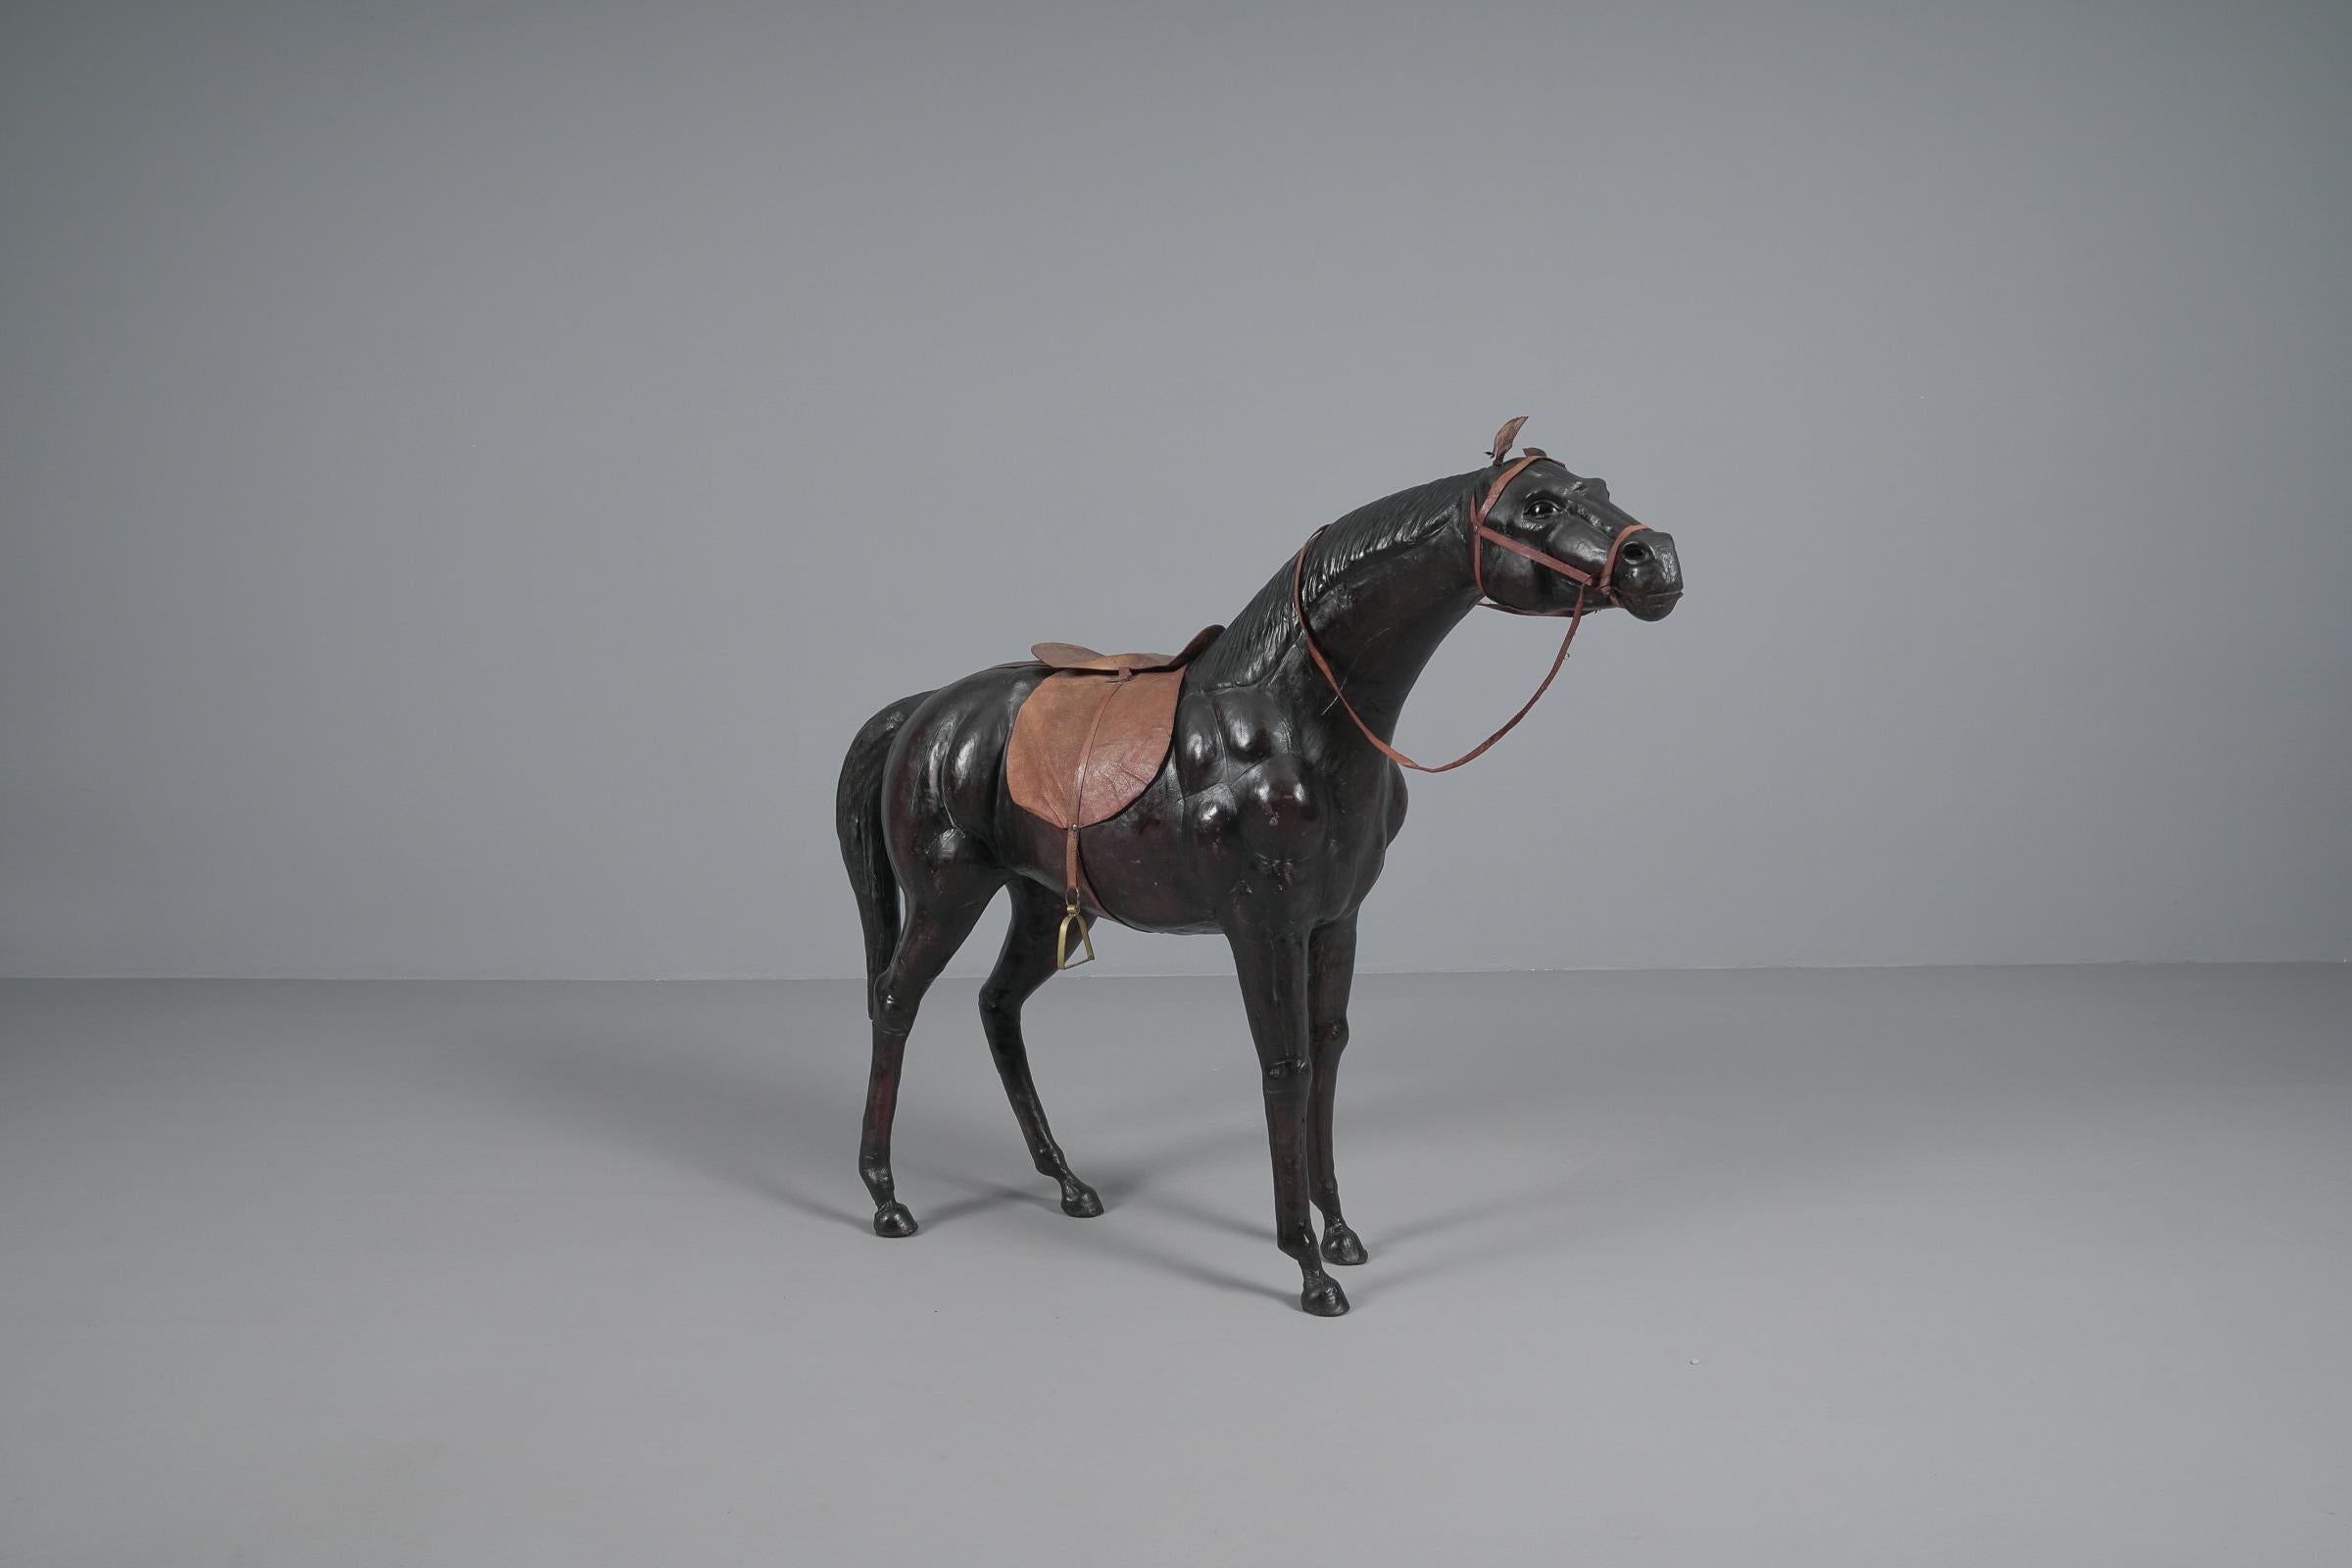 Extremely rare, very decorative and lifelike horse made of leather. Probably from the house 